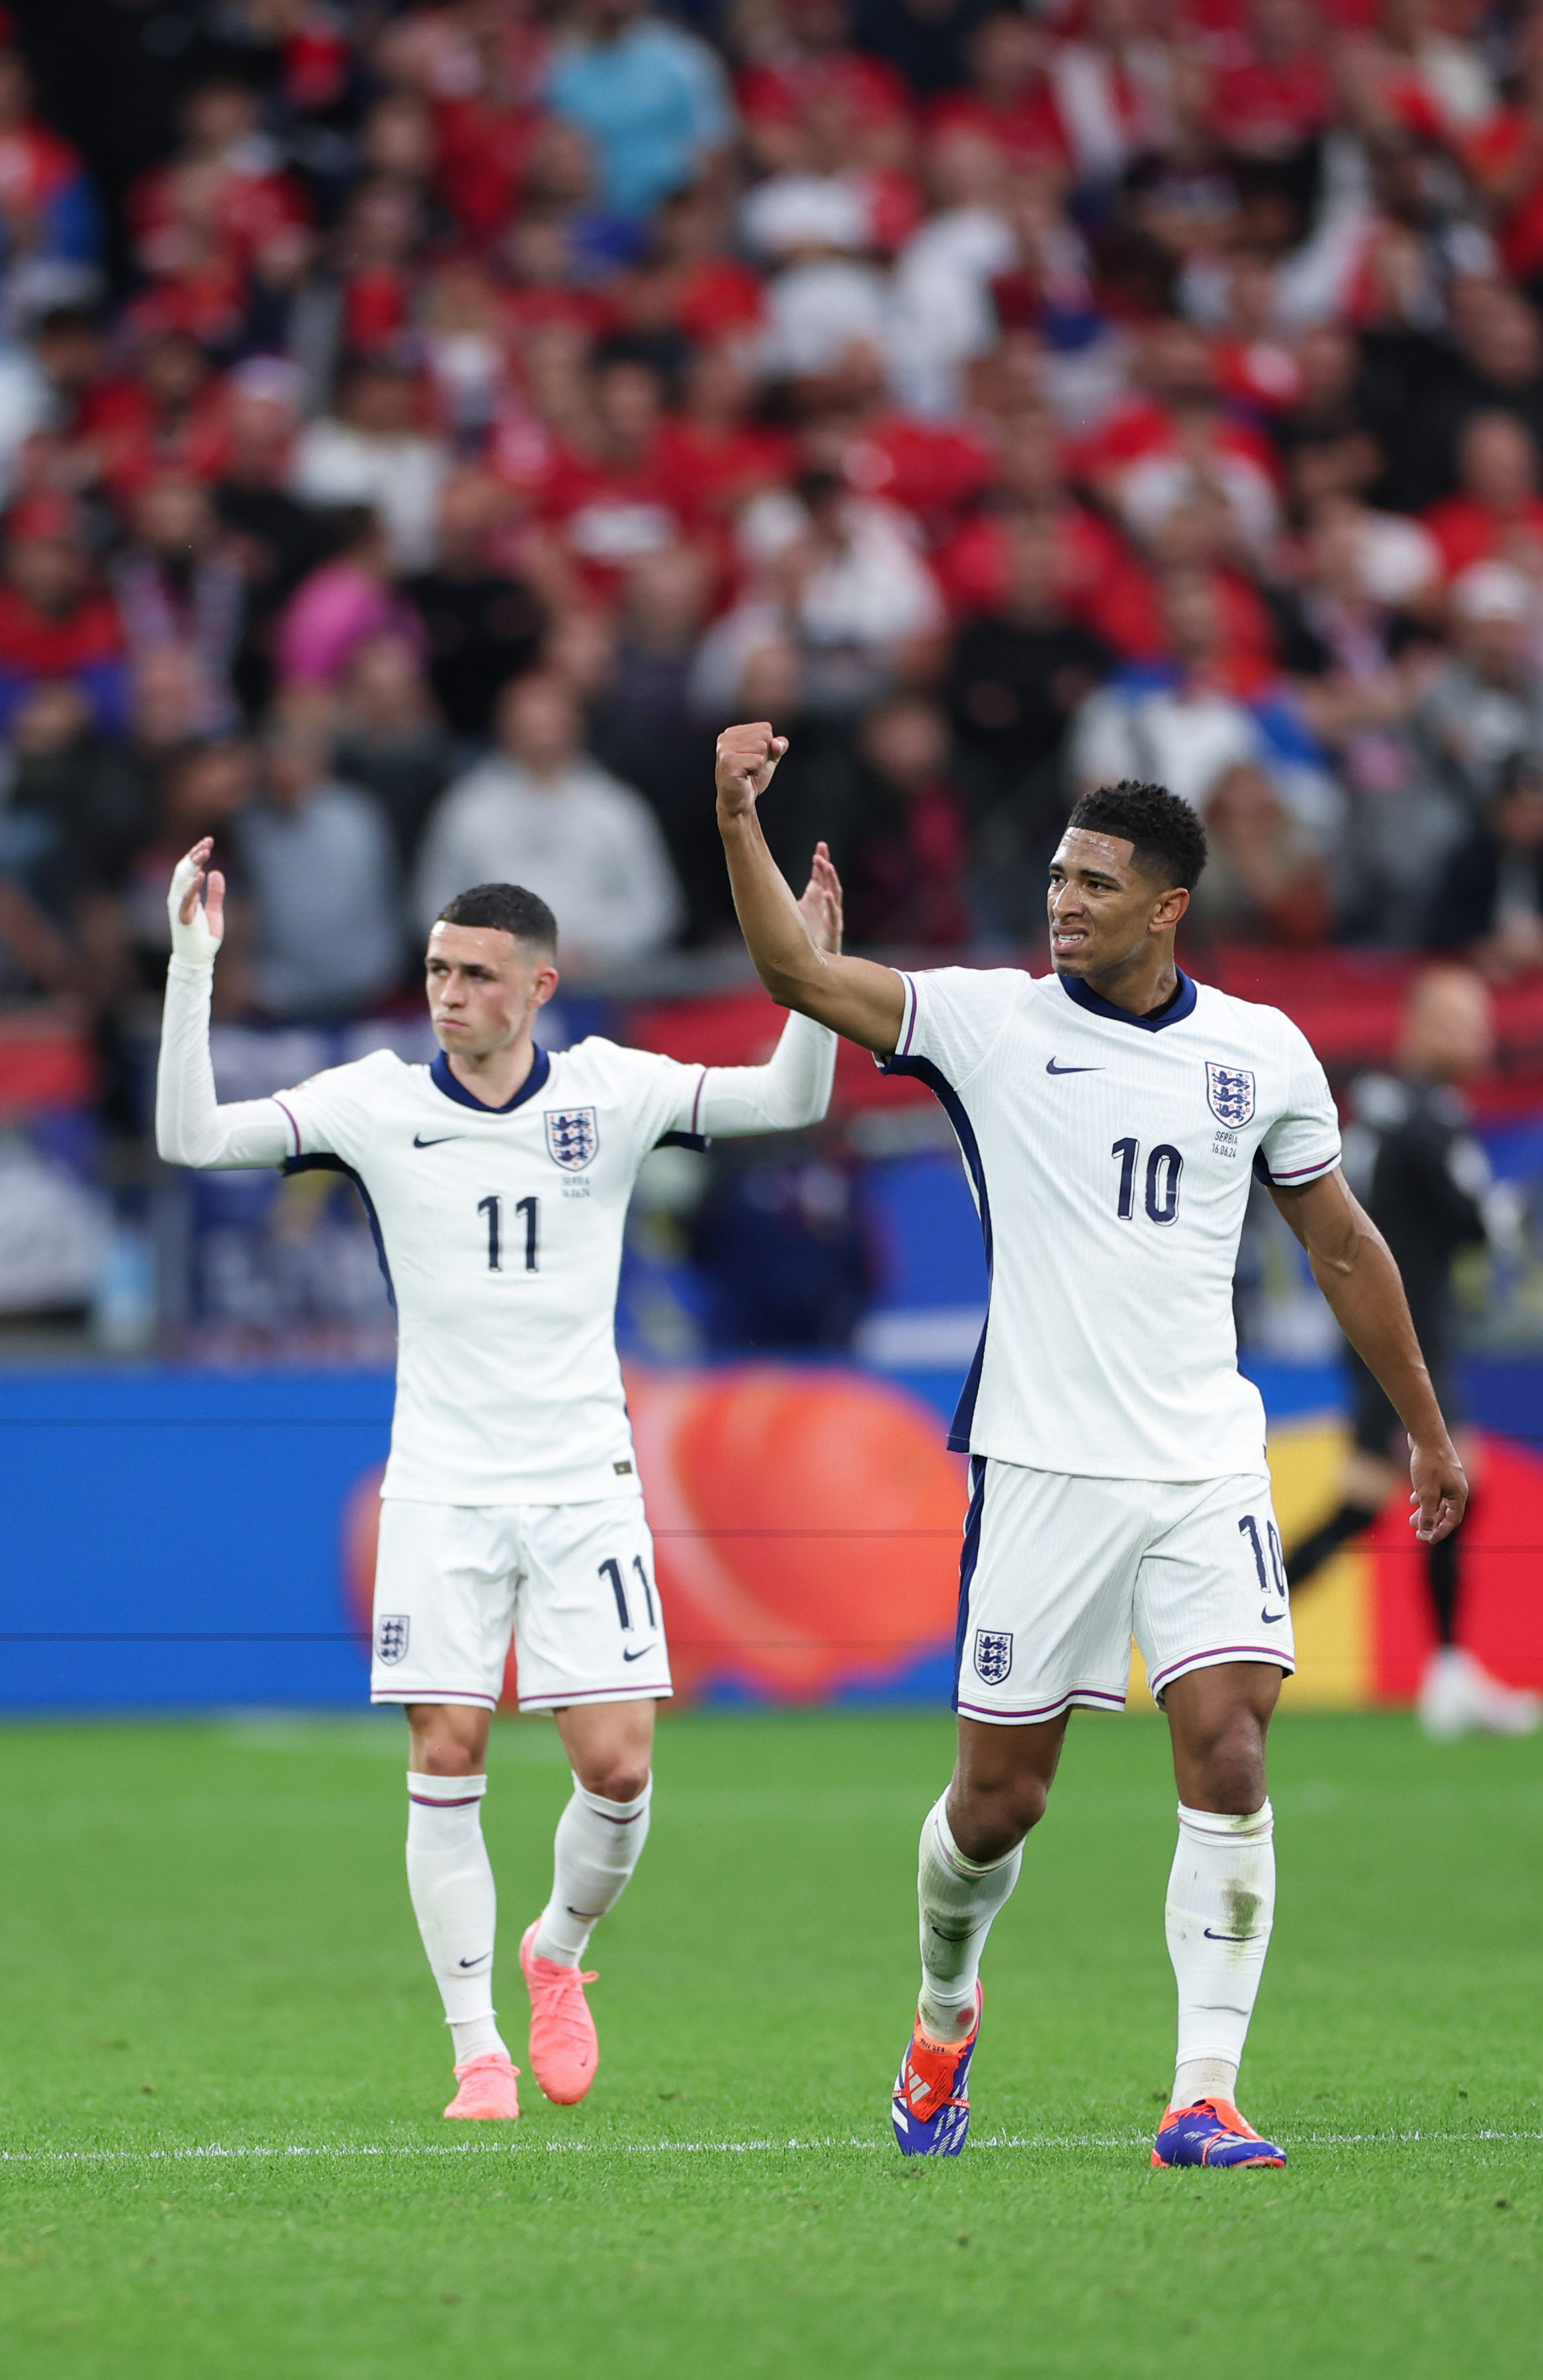 Phil Foden (left) and Jude Bellingham are both contenders for England’s No 10 position. Photo: Xinhua